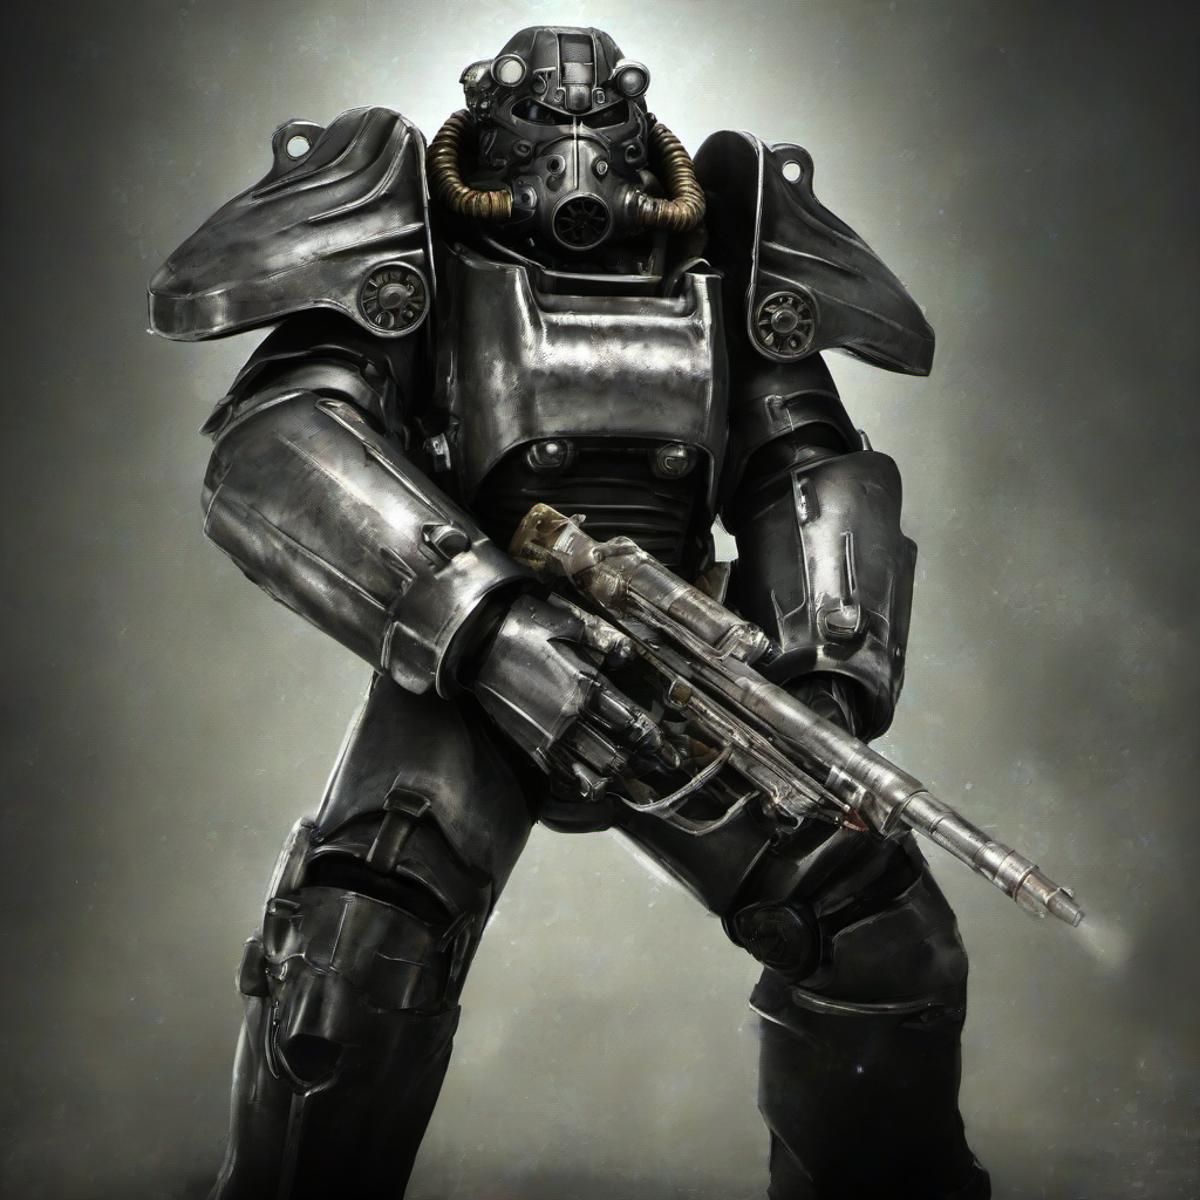 PE PowerArmor Guy [Fallout] image by Proompt_Engineer